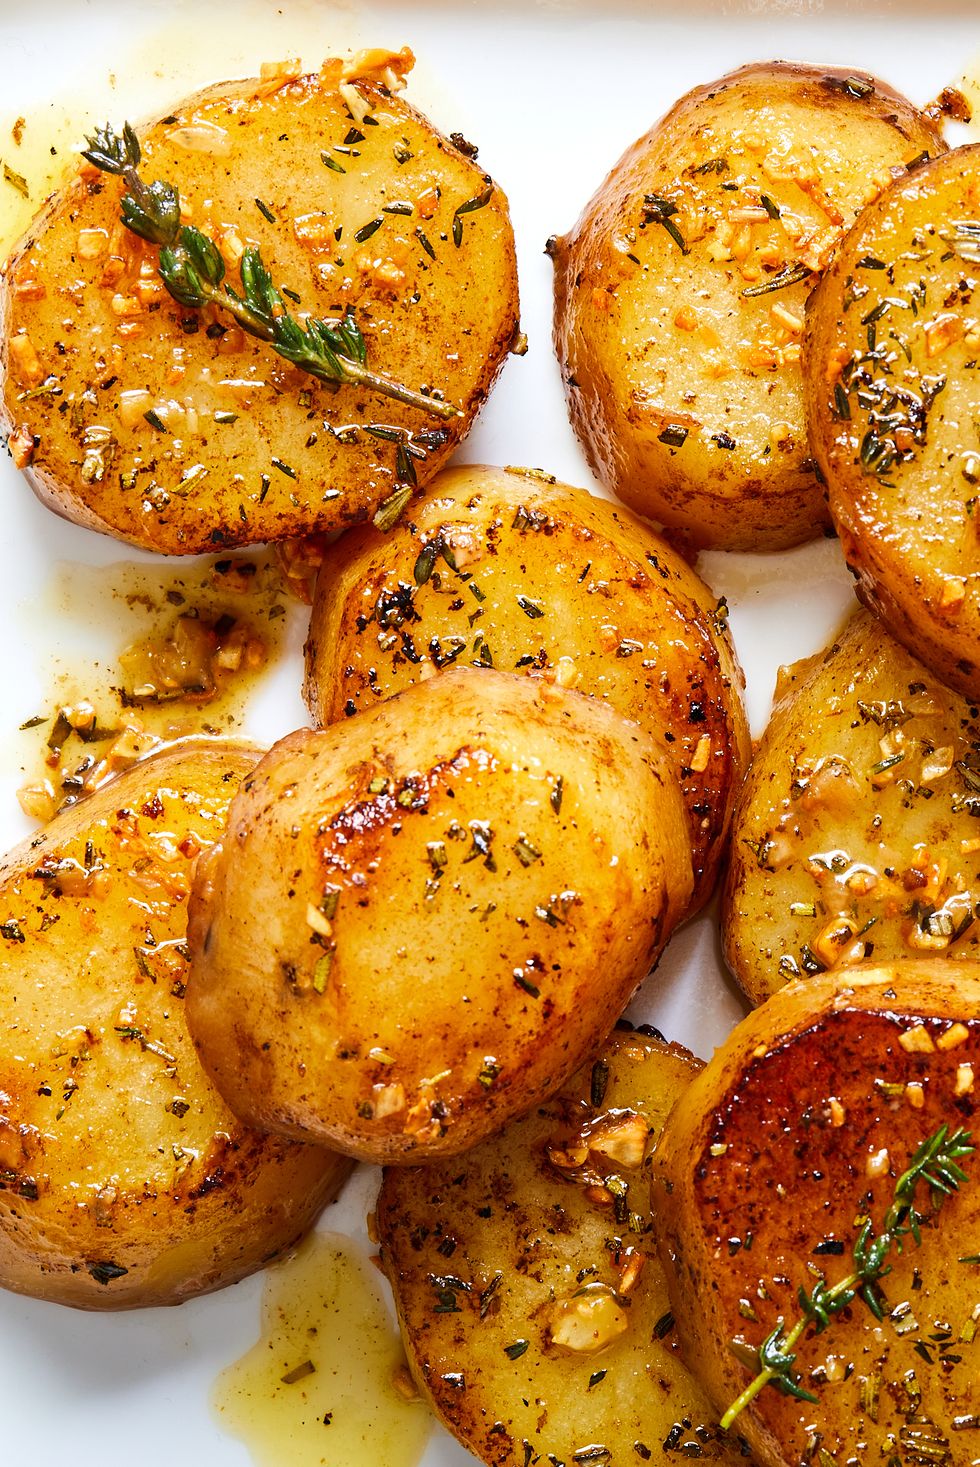 melting potatoes with herbs